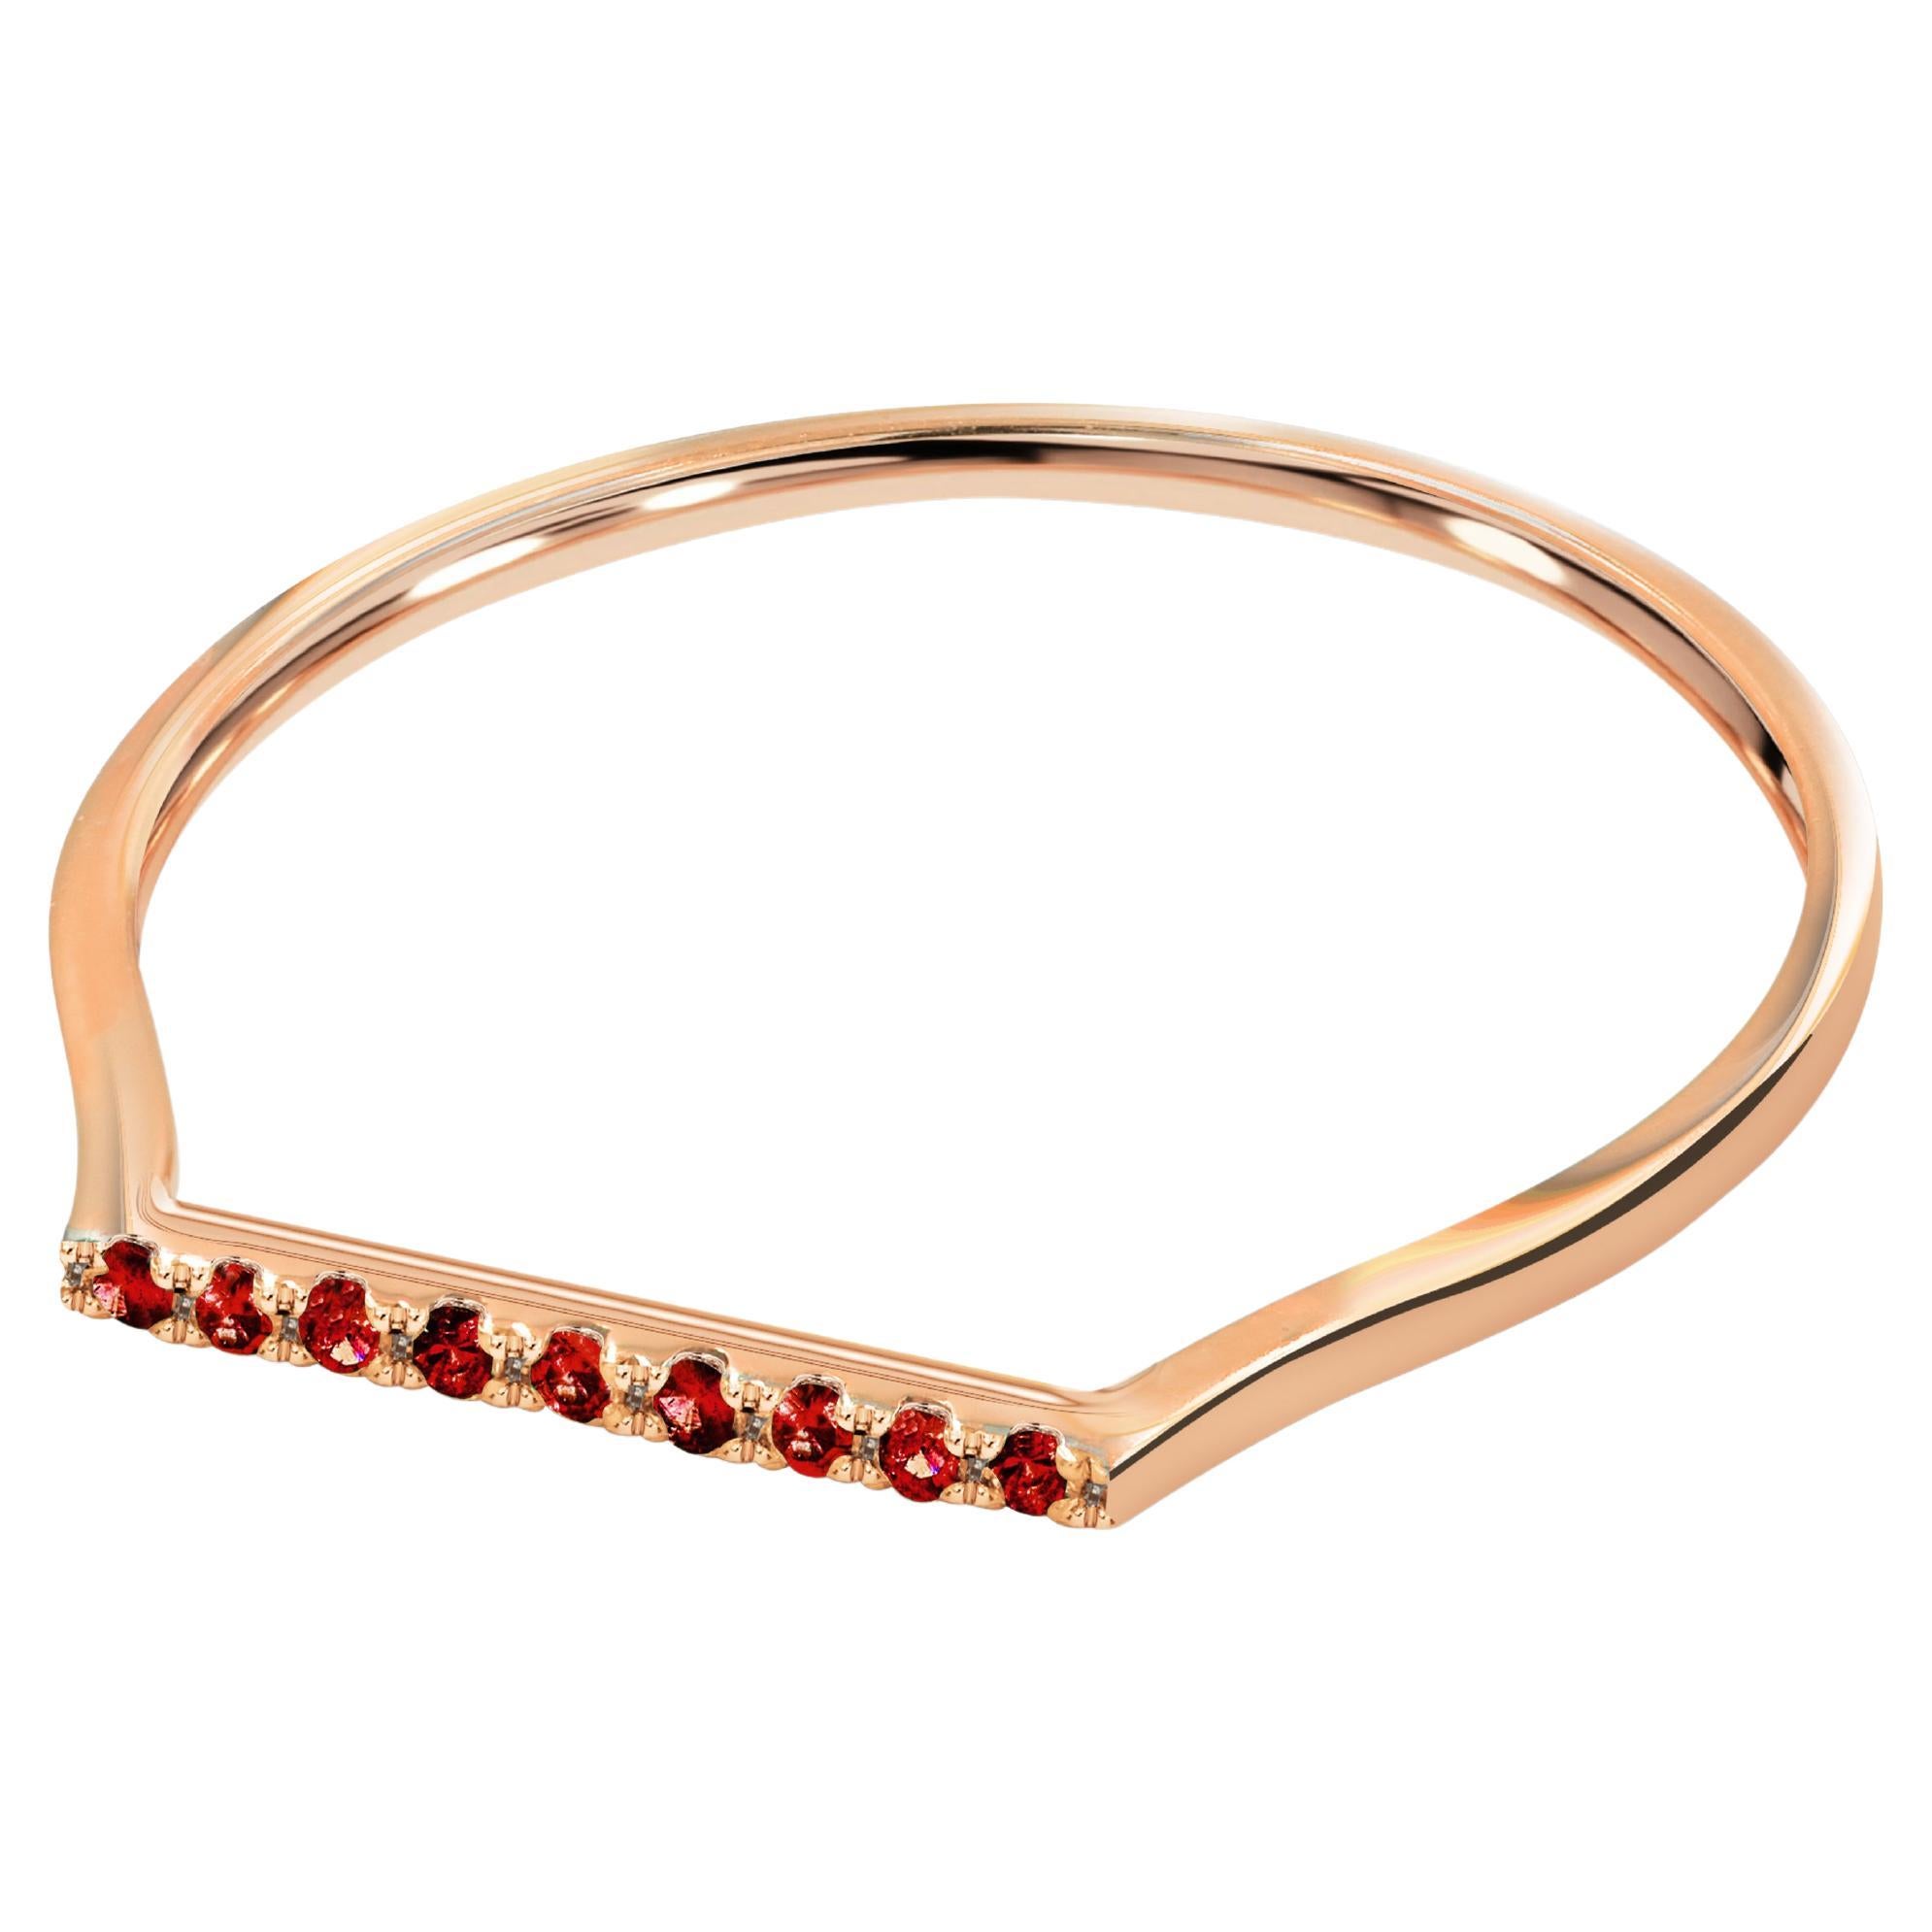 For Sale:  18k Gold Natural Ruby Ring Thin Bar Stacking Ring